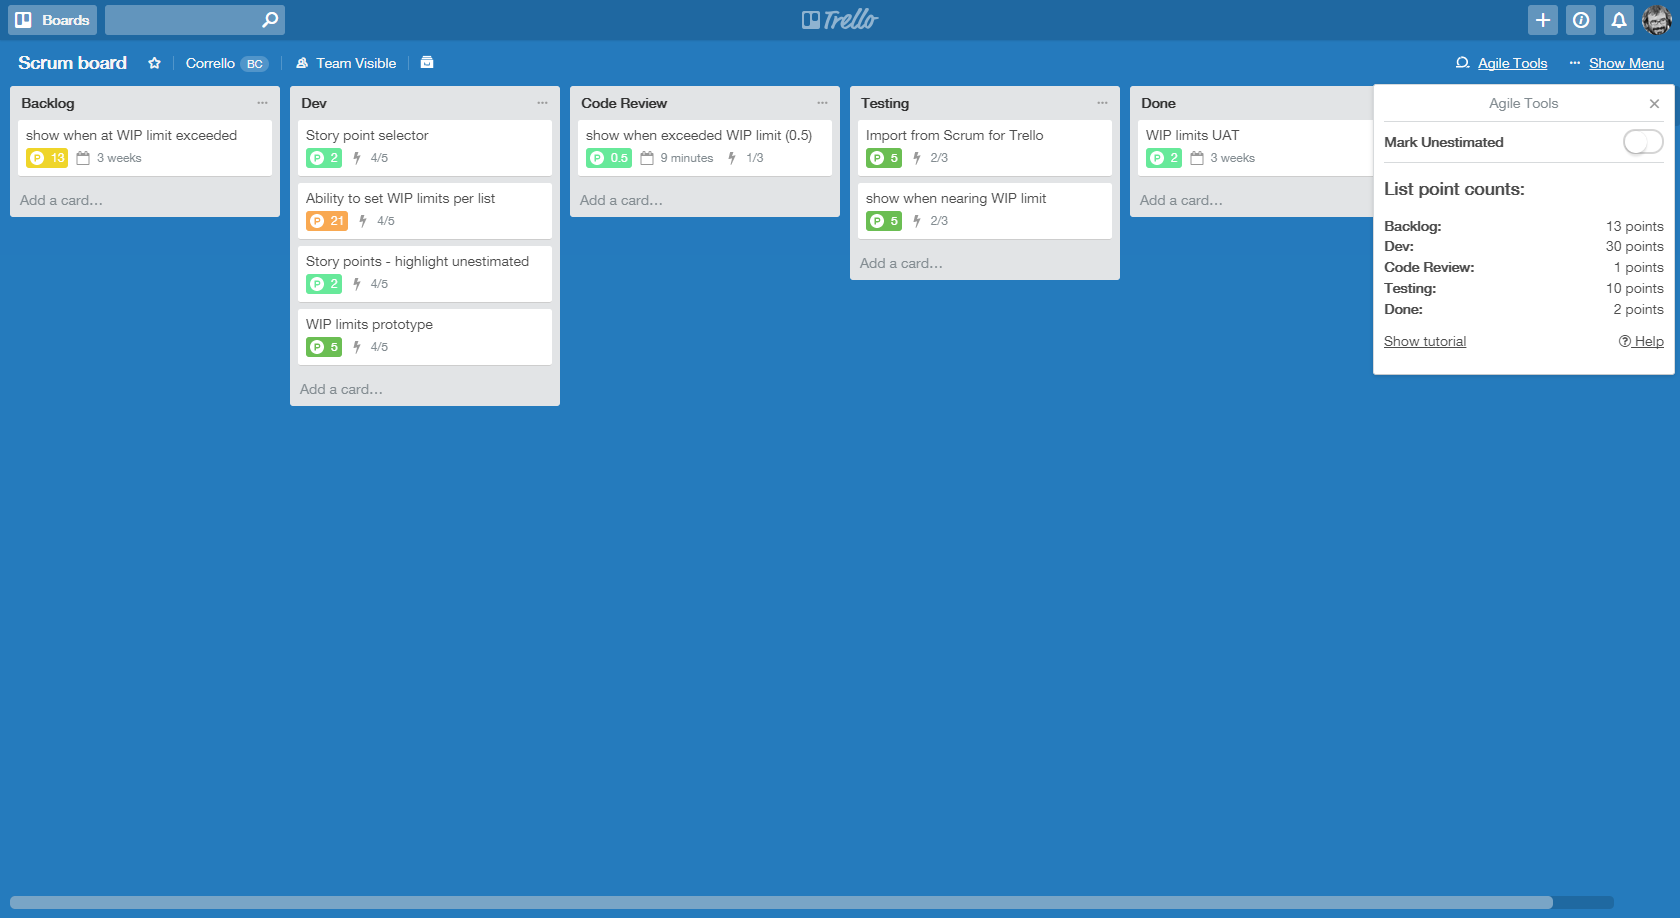 Best 35 Trello Boards for you to see and get inspired, by Vai from  TrickyPhotoshop